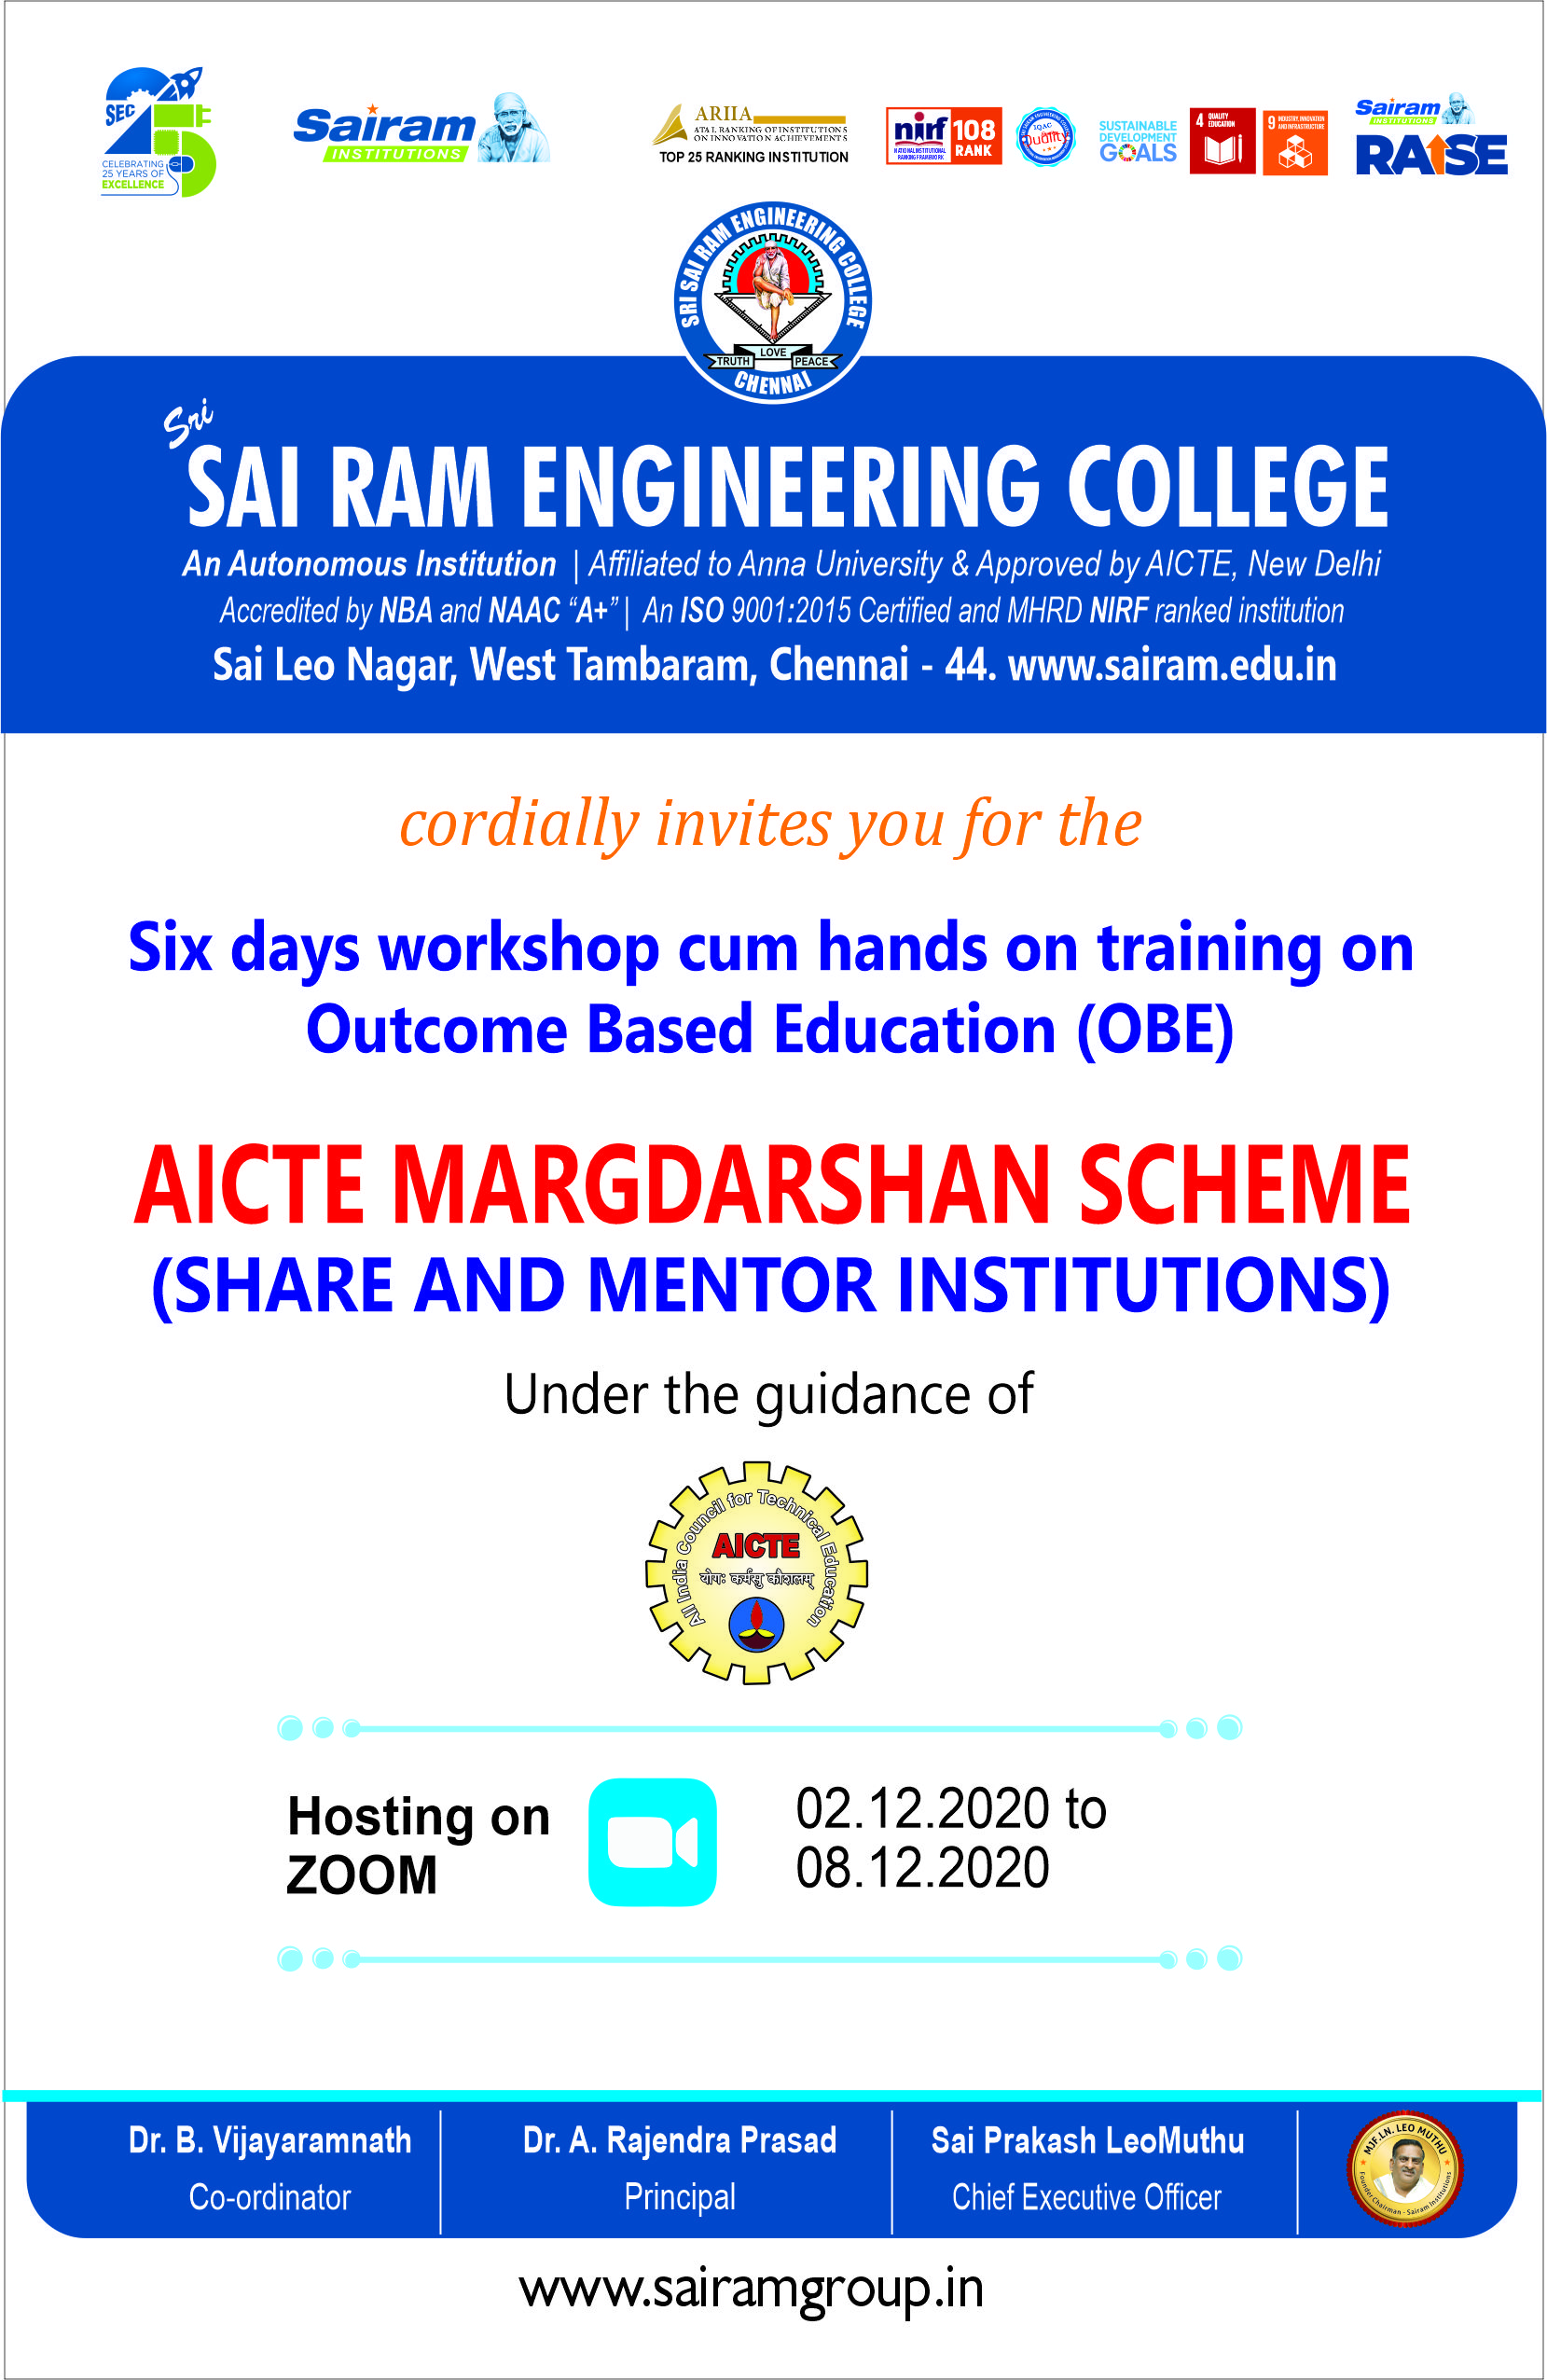 Sri Sairam Engineering College organises “six days workshop cum hands on training on Outcome Based Education (OBE)” – AICTE MARGDHARSHAN SCHEME  (Share and Mentor Institutions) under the guidance of MHRD and AICTE from 02.12.2020 to 08.12.2020. The program is hosted on ZOOM.